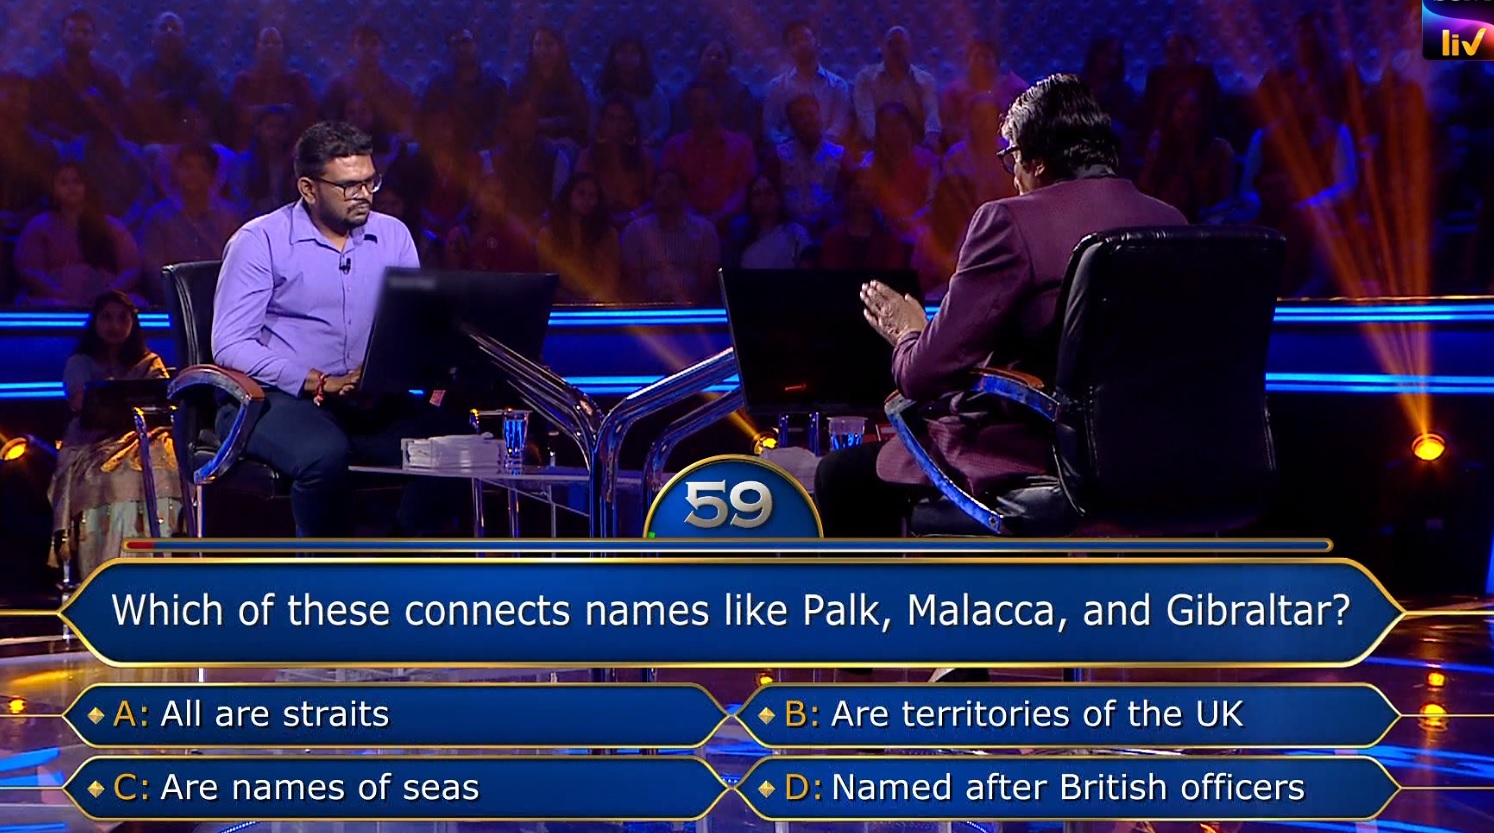 Ques : Which of these connects name like Palk, Malacca, and Gibraltar?